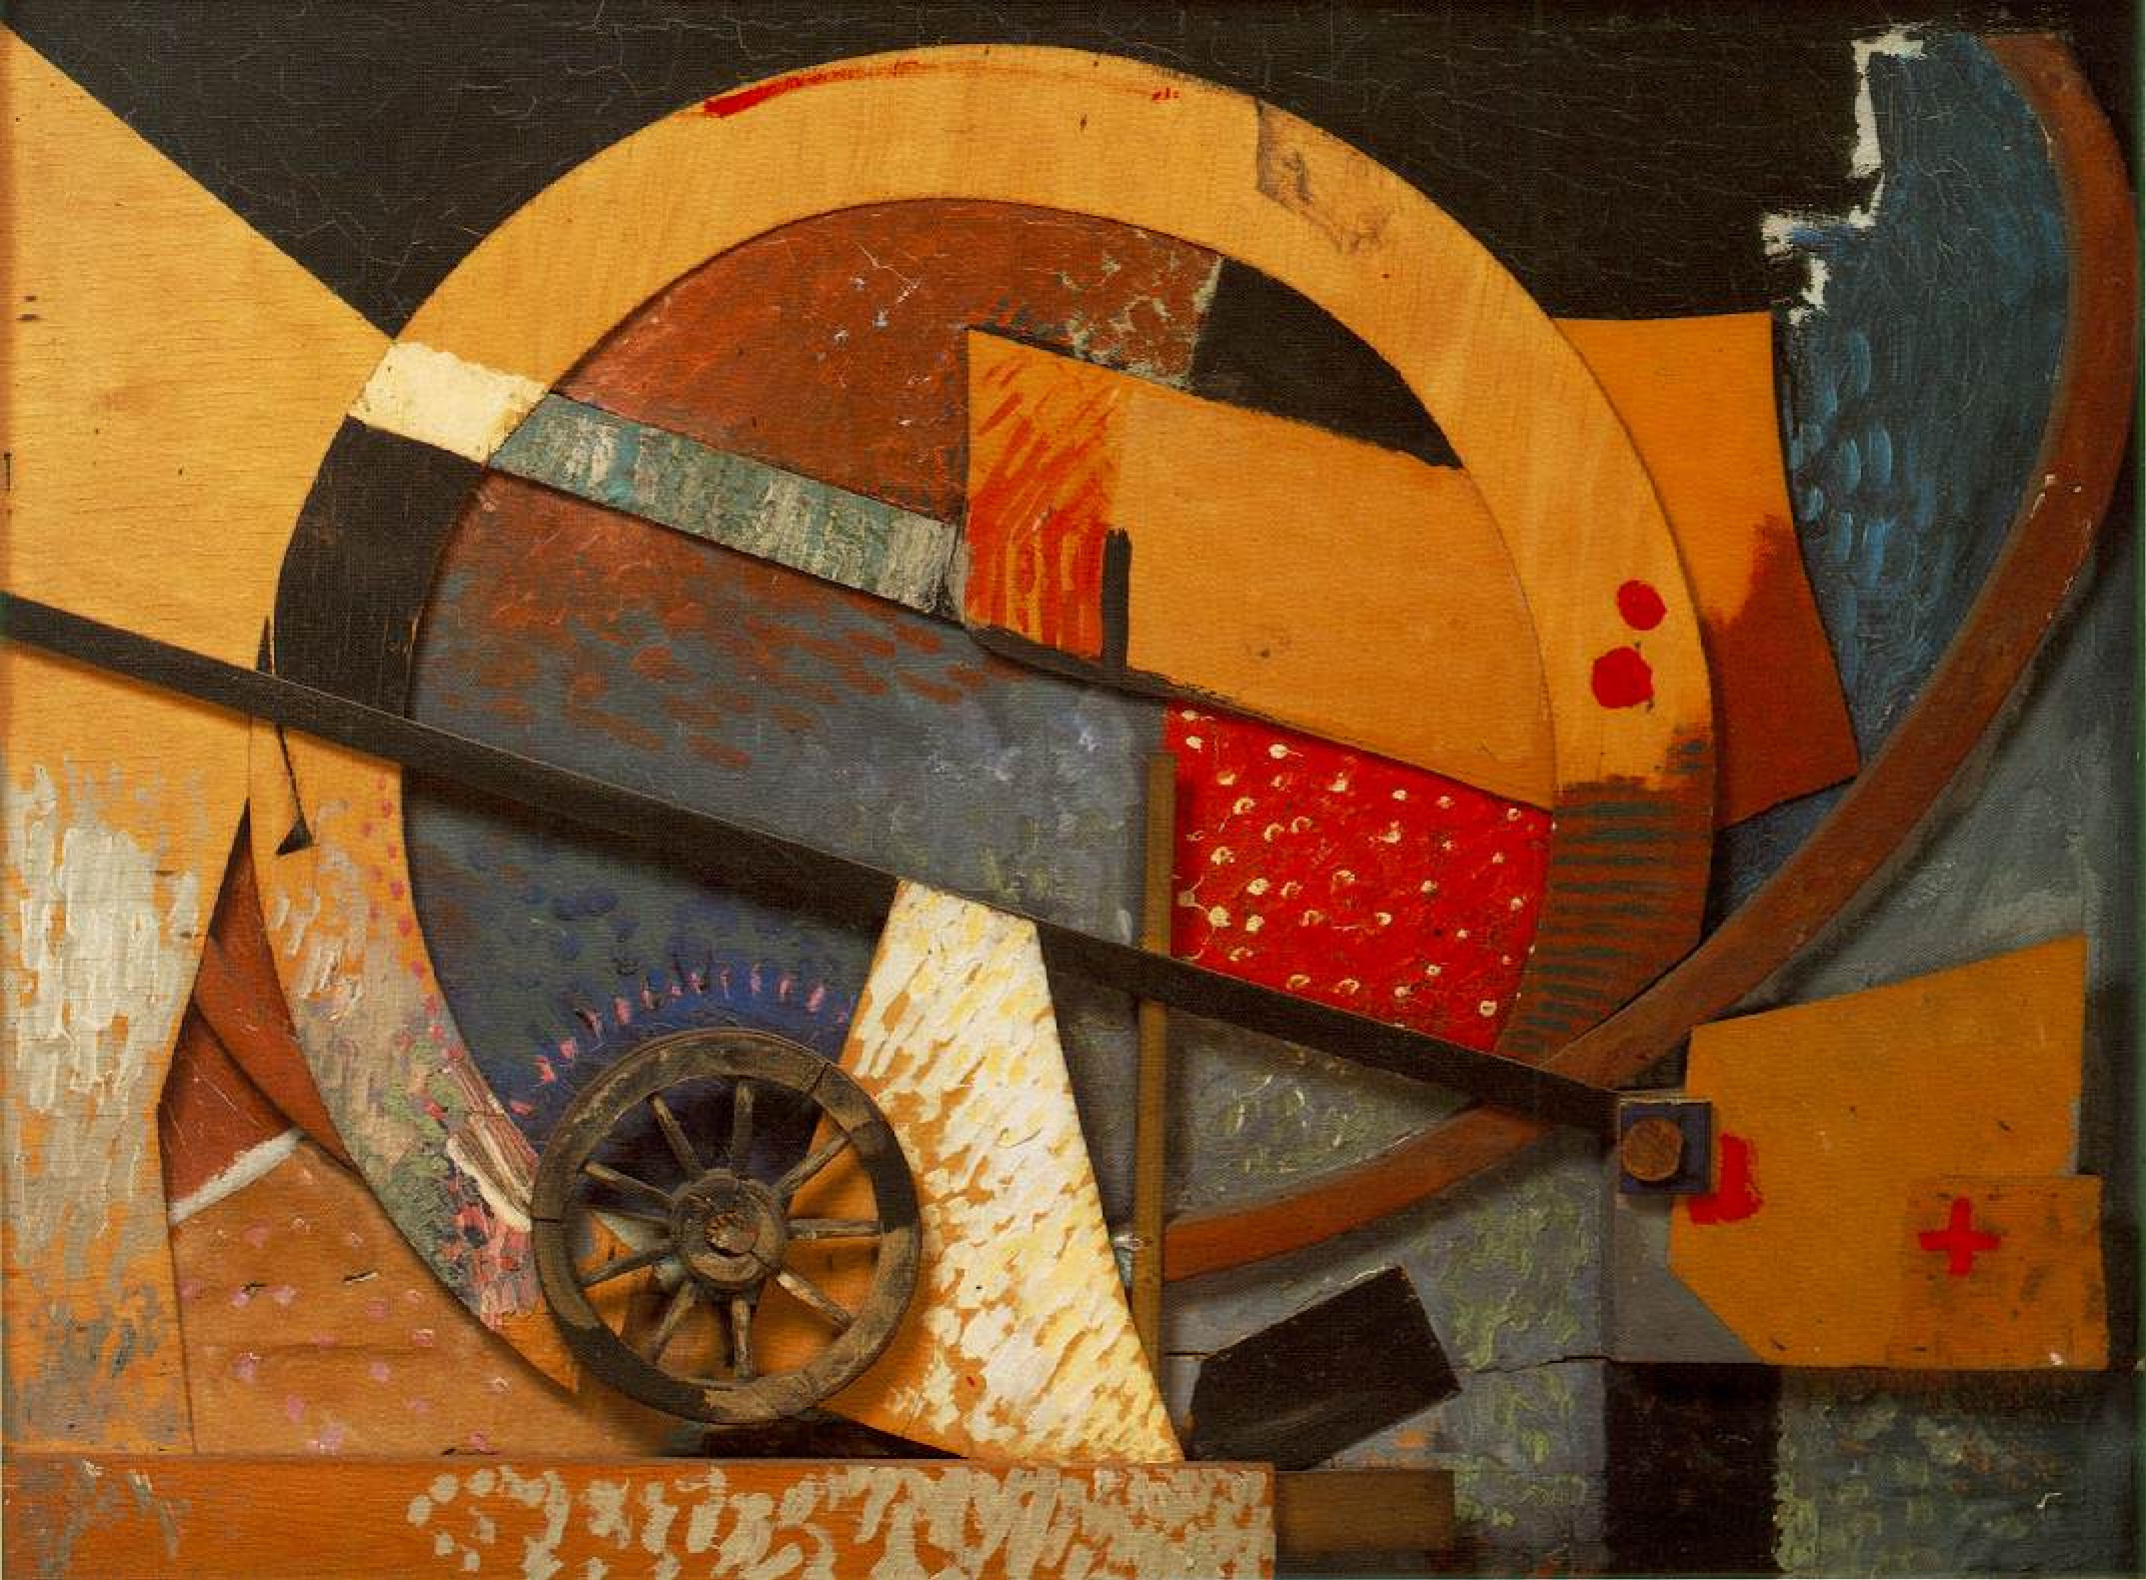 New Merz picture, 1931, 111×82 cm by Kurt Schwitters: History 